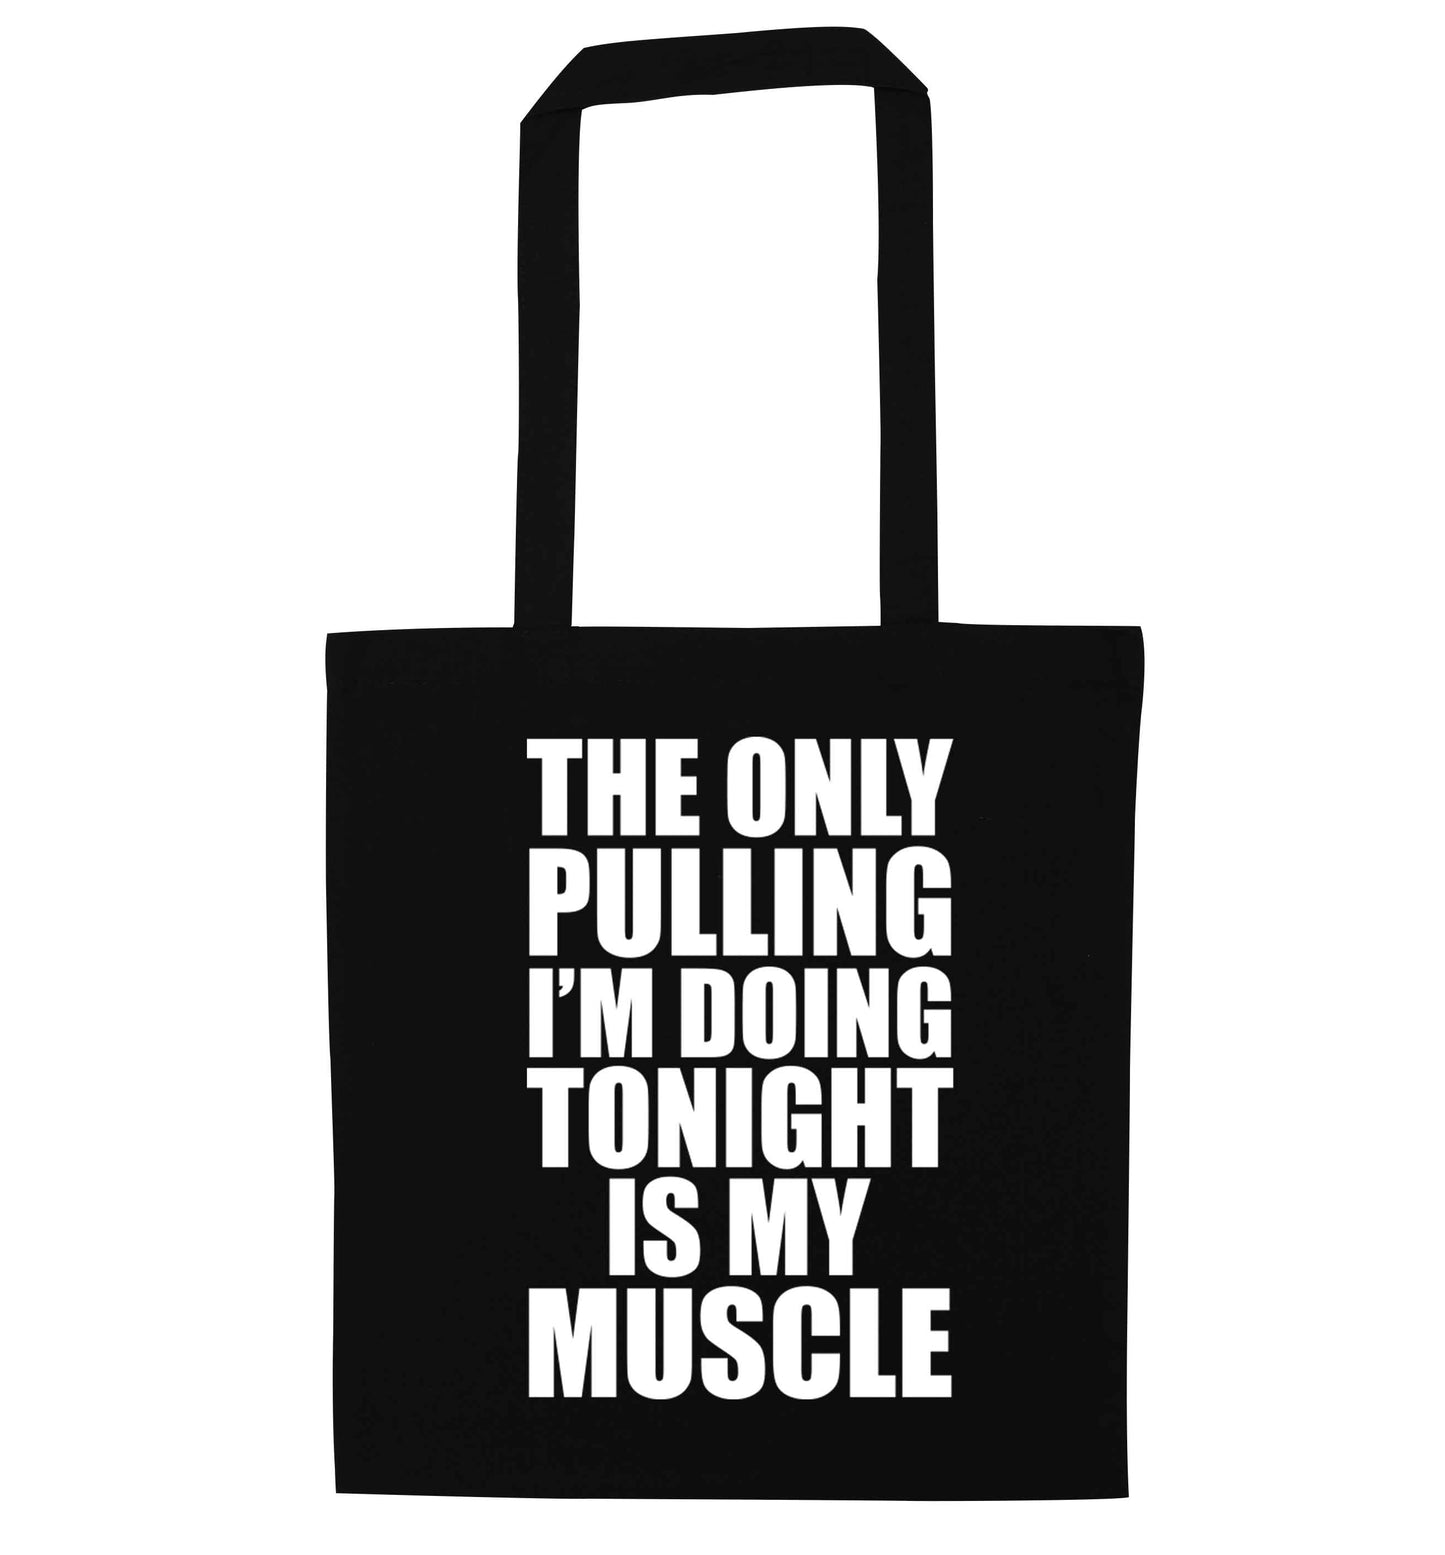 The only pulling I'm doing tonight is my muscle black tote bag